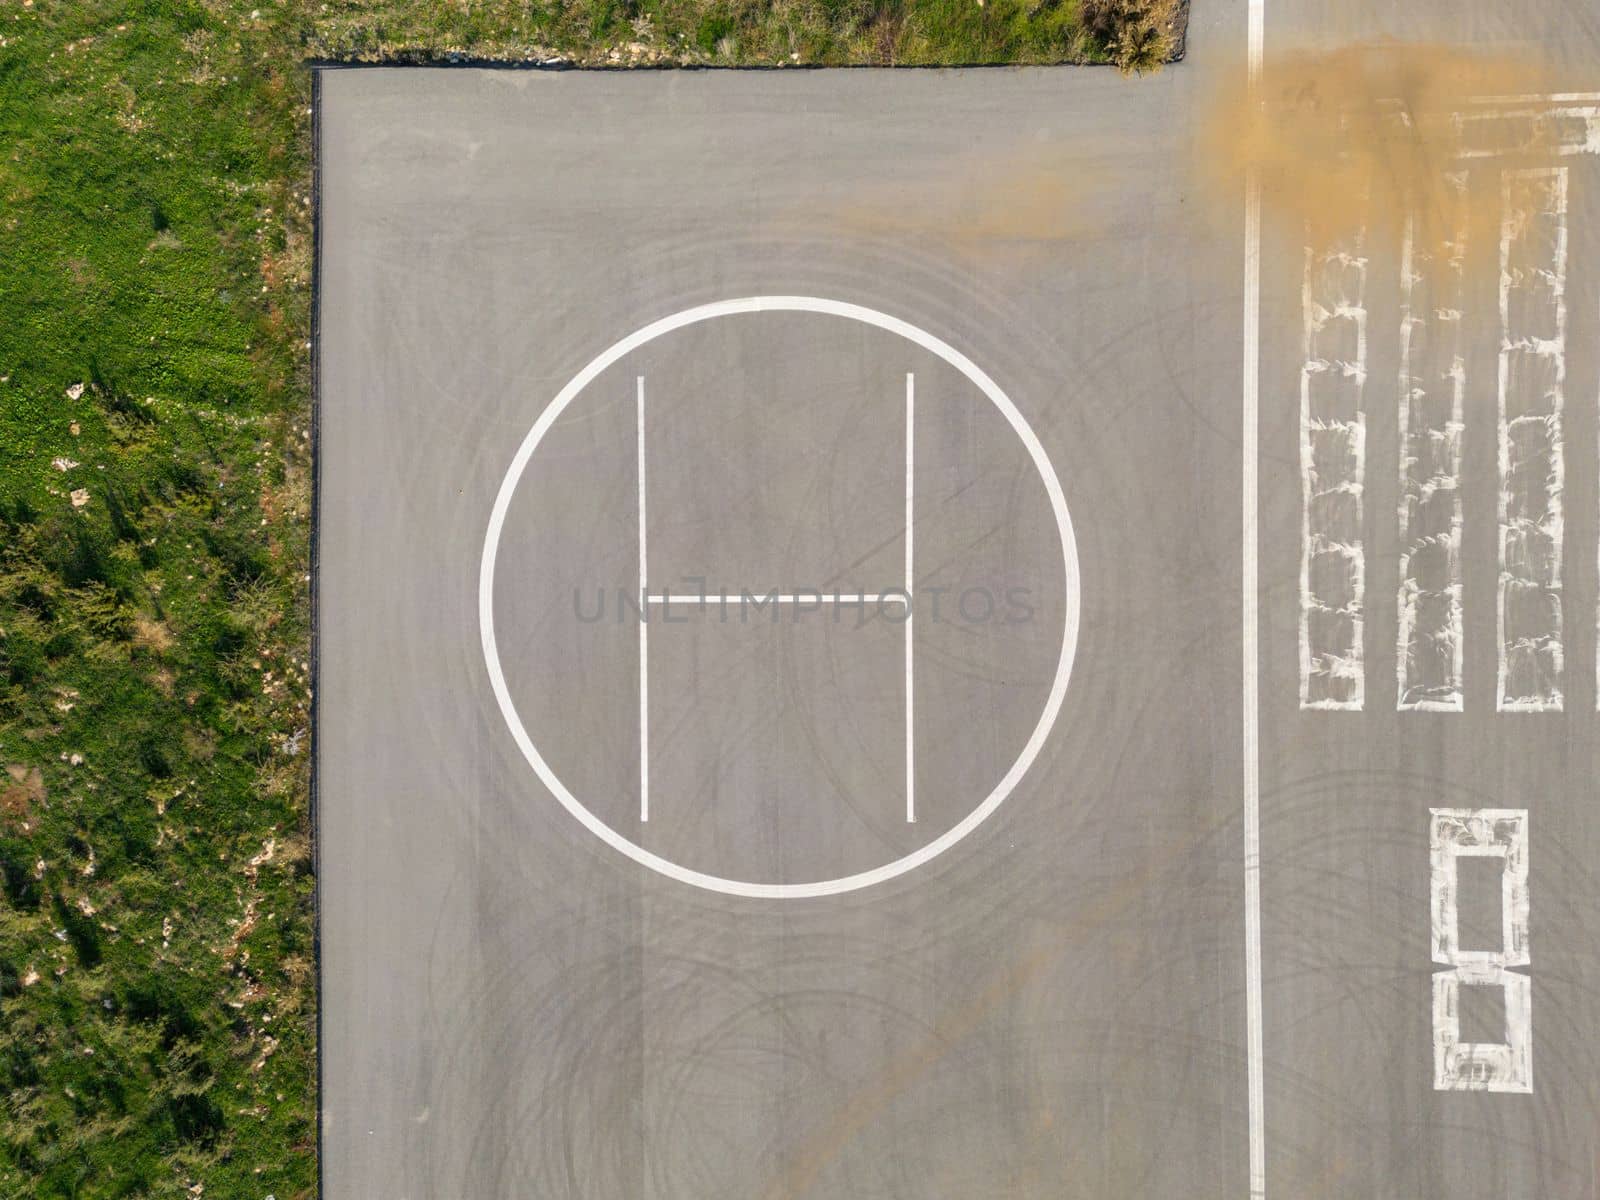 Helipad next to small airstrip in countryside by Sonat